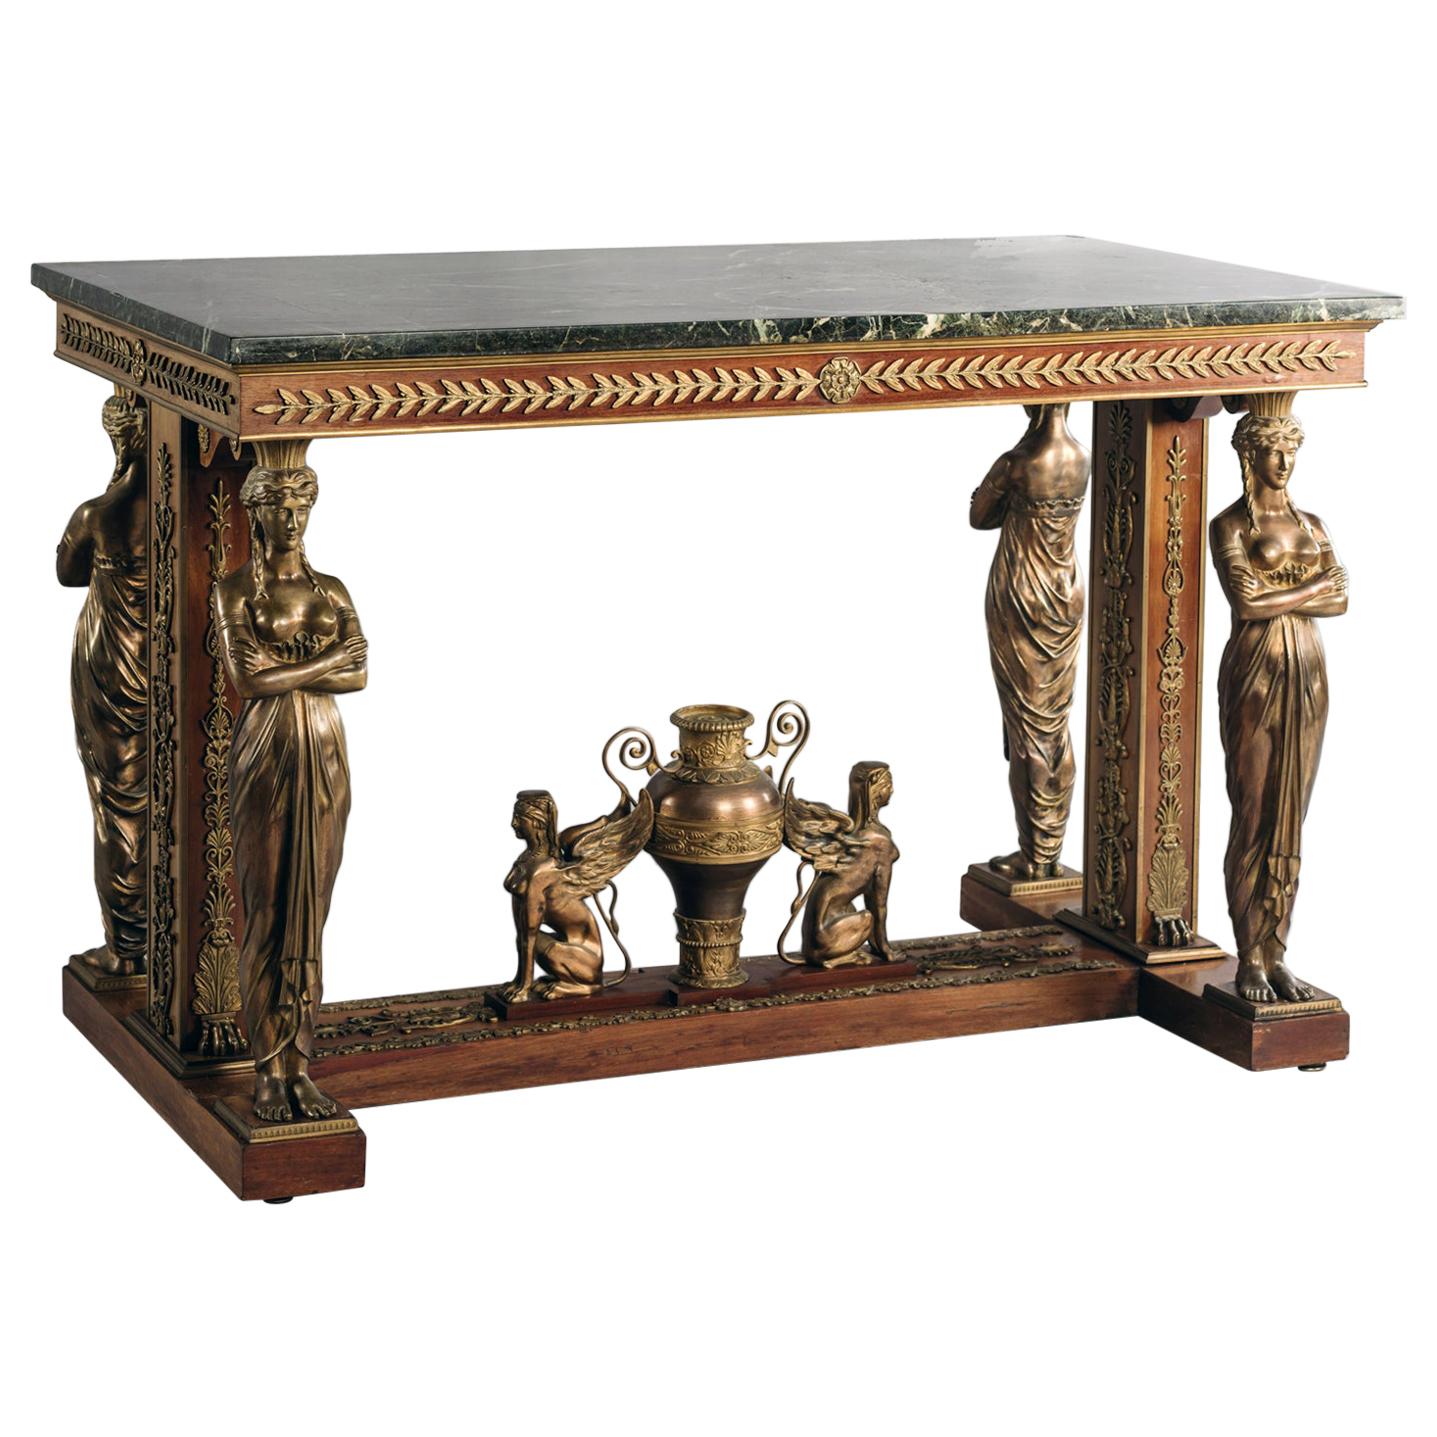 Empire Style Centre Table with Marble Top after Jacob-Desmalter, French